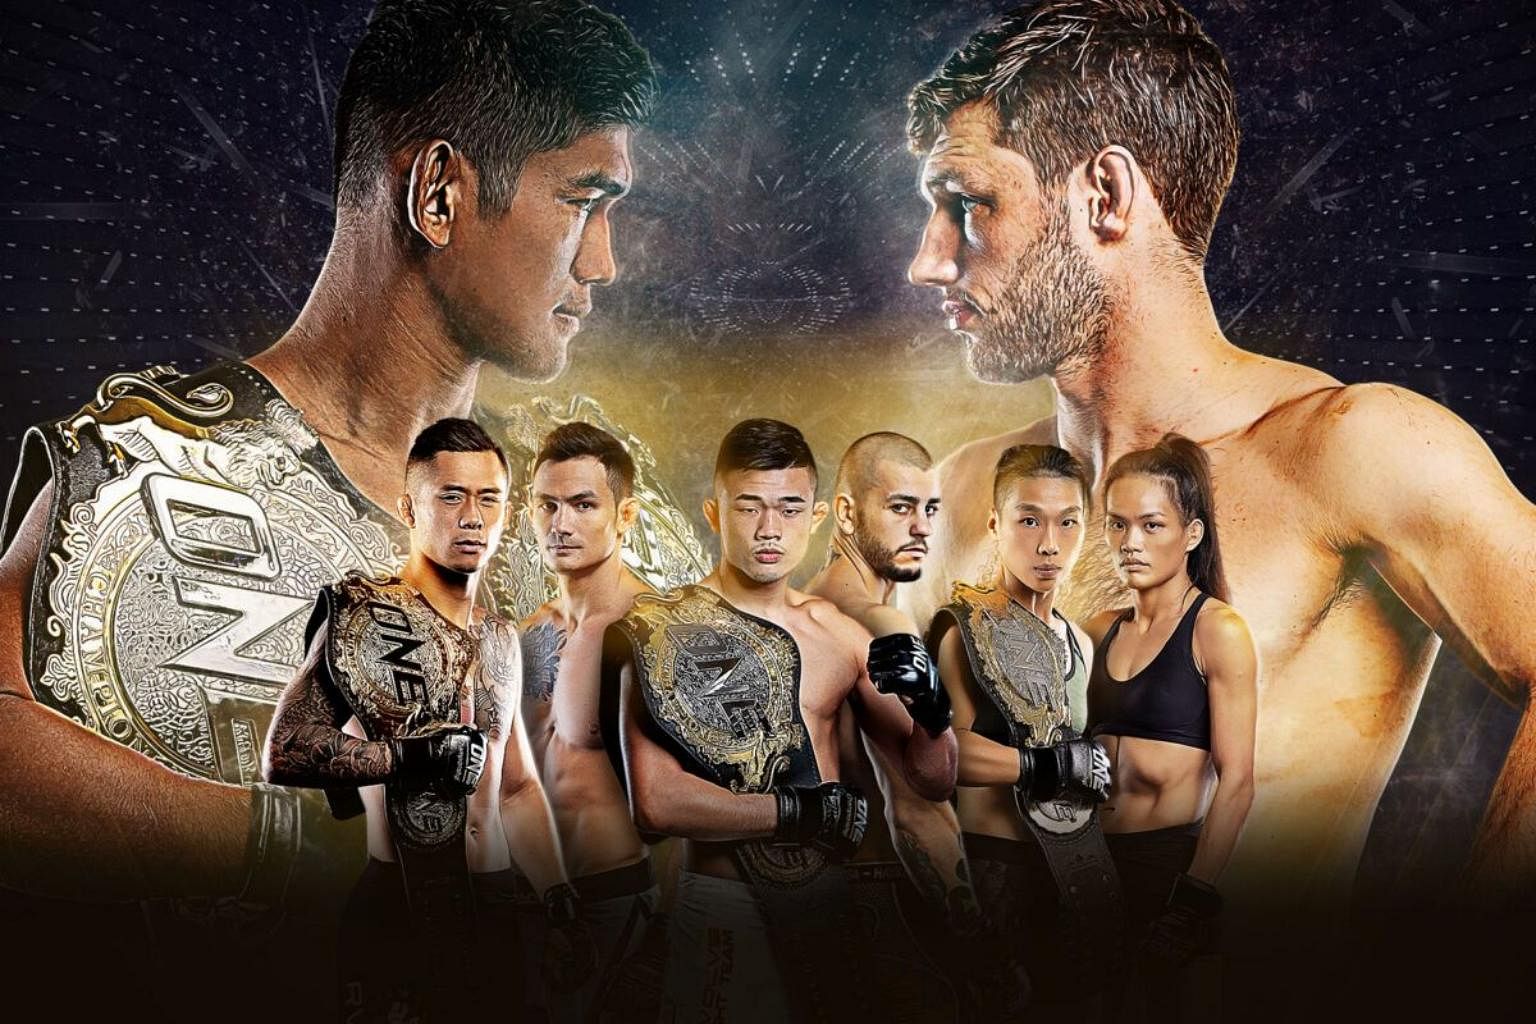 Mma 250 Fans Allowed For Oct 30 One Championship Fight In Singapore Tickets Cost 148 Combat Sports News Top Stories The Straits Times